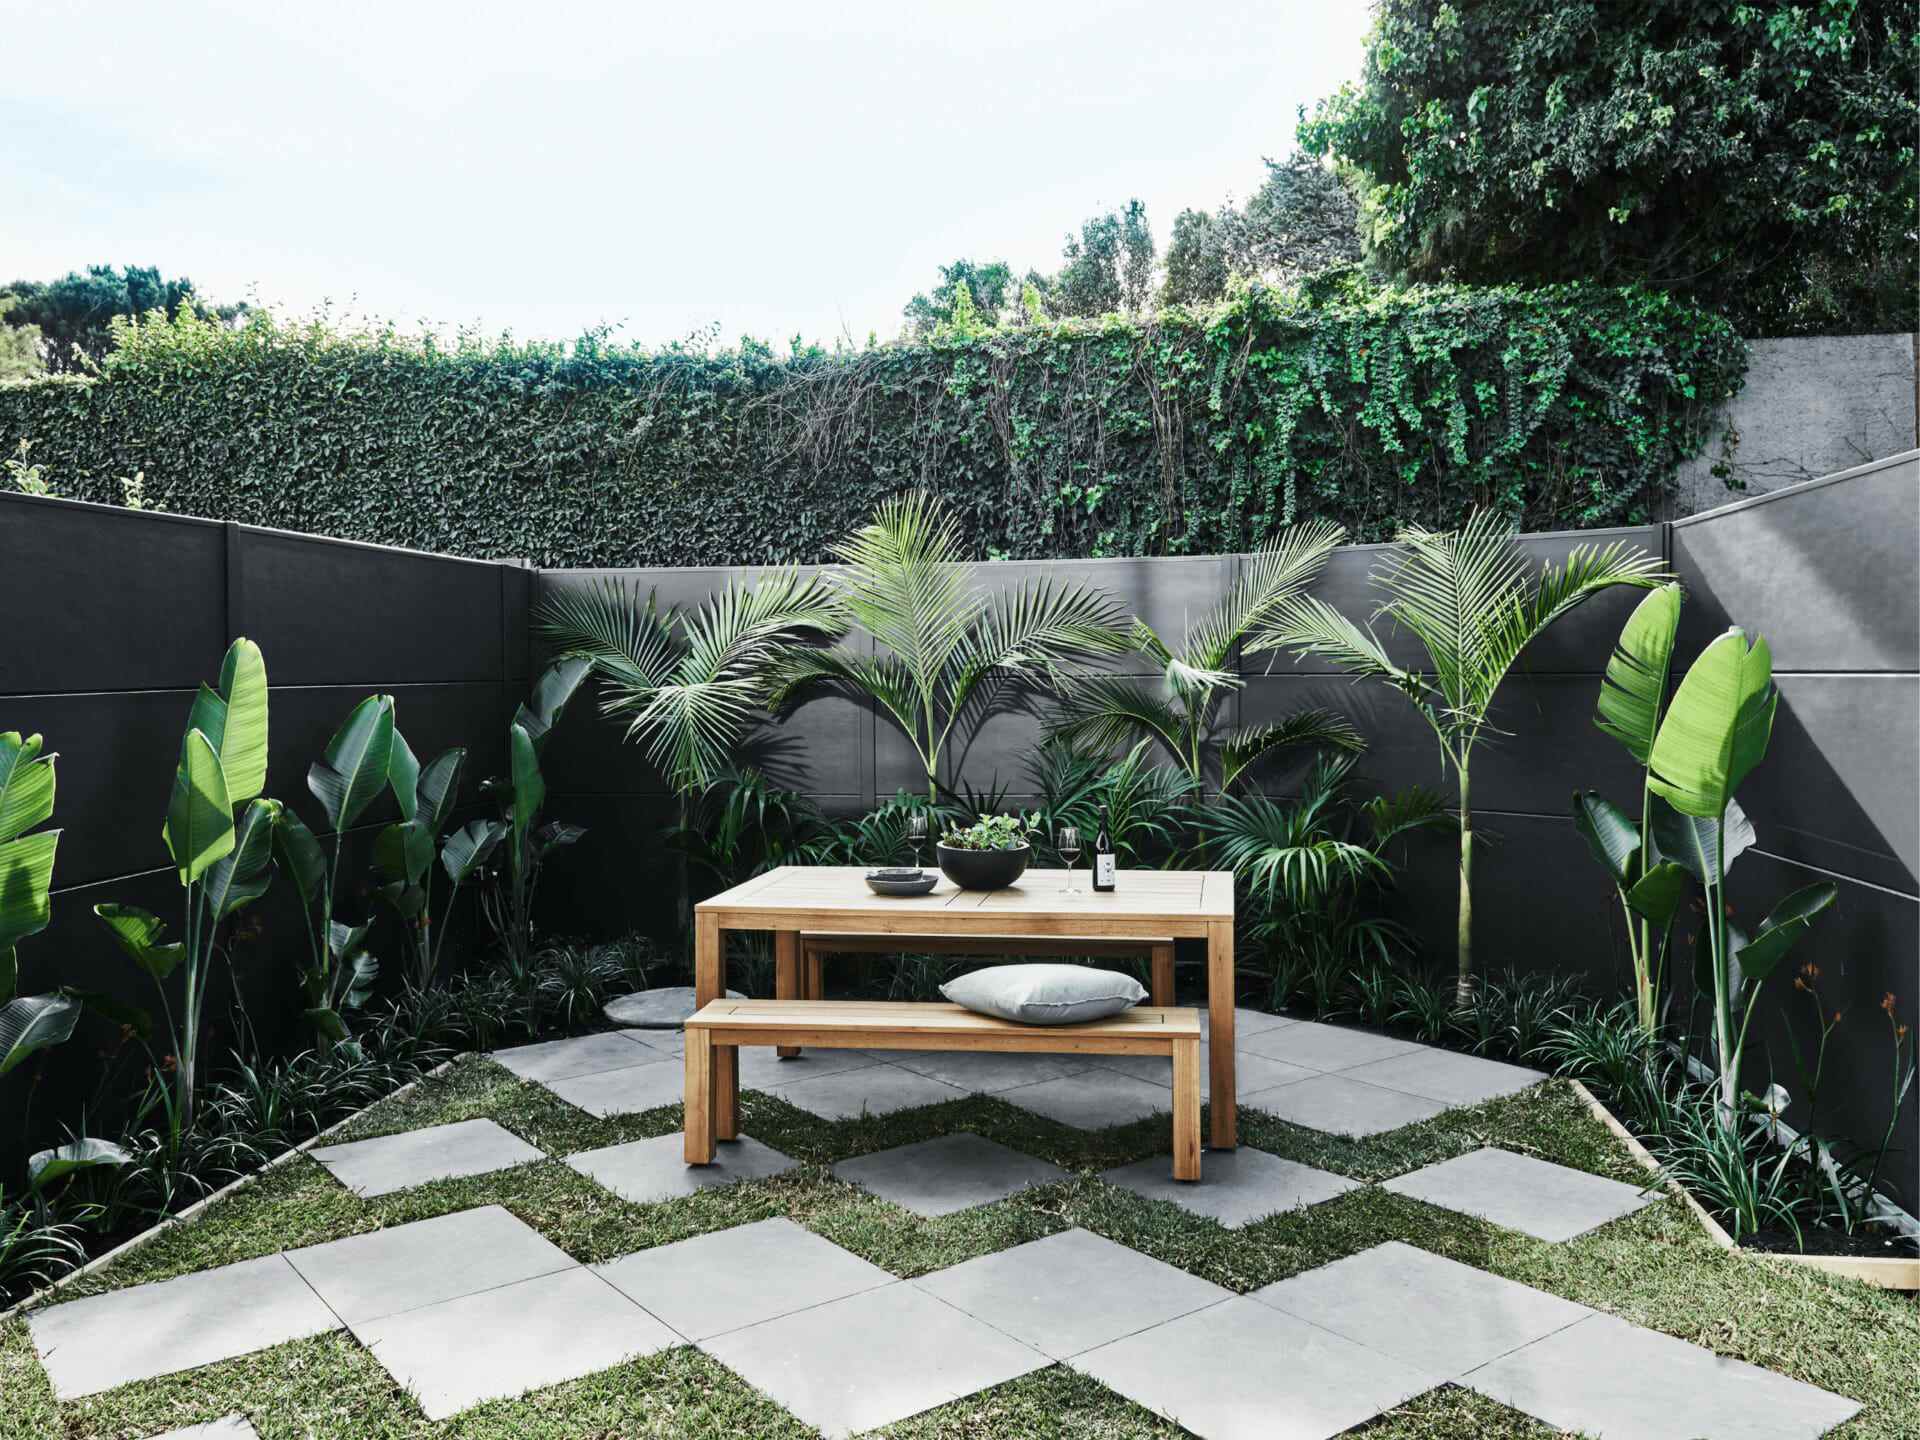 How To Soundproof Your Backyard